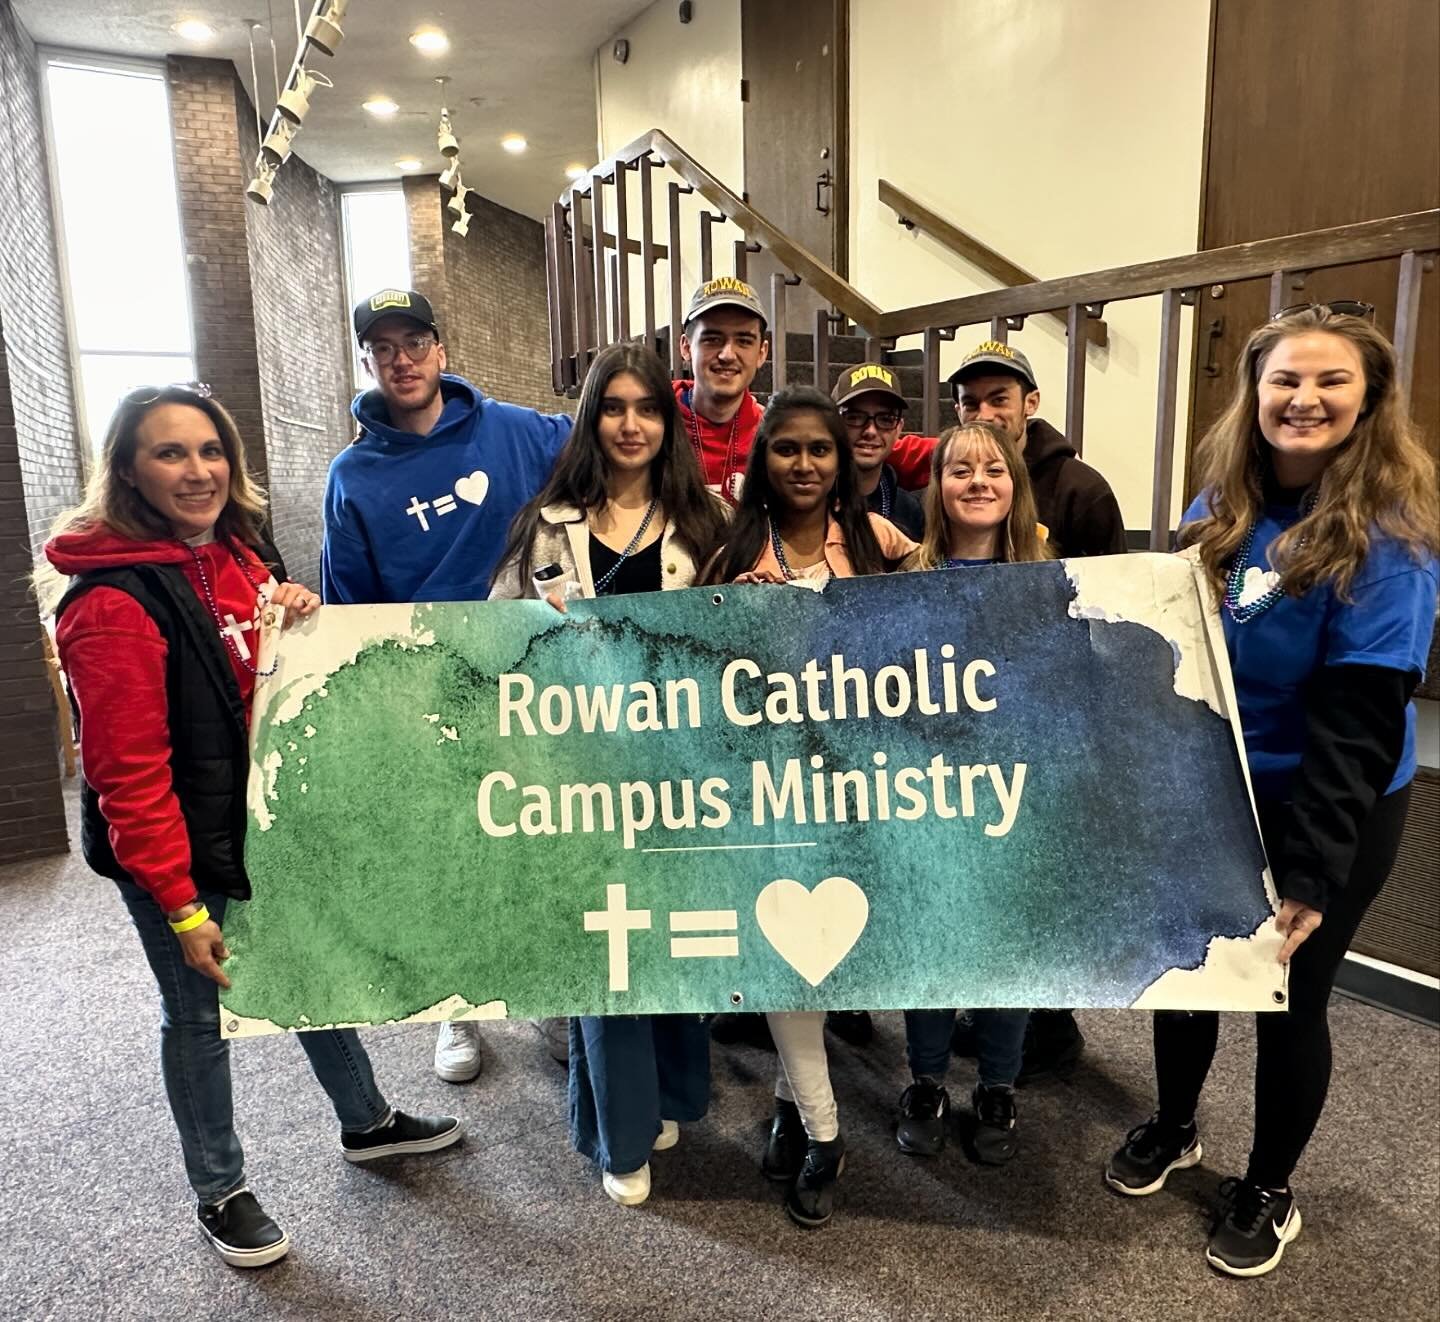 This morning Rowan Catholic Students participated in the Suicide Prevention Walk. It&rsquo;s an important event with a pro-life message. Thank you to all @rowanuniversity who organized it. 

#stbridgetuniversityparish #newman #rowancatholic  #service